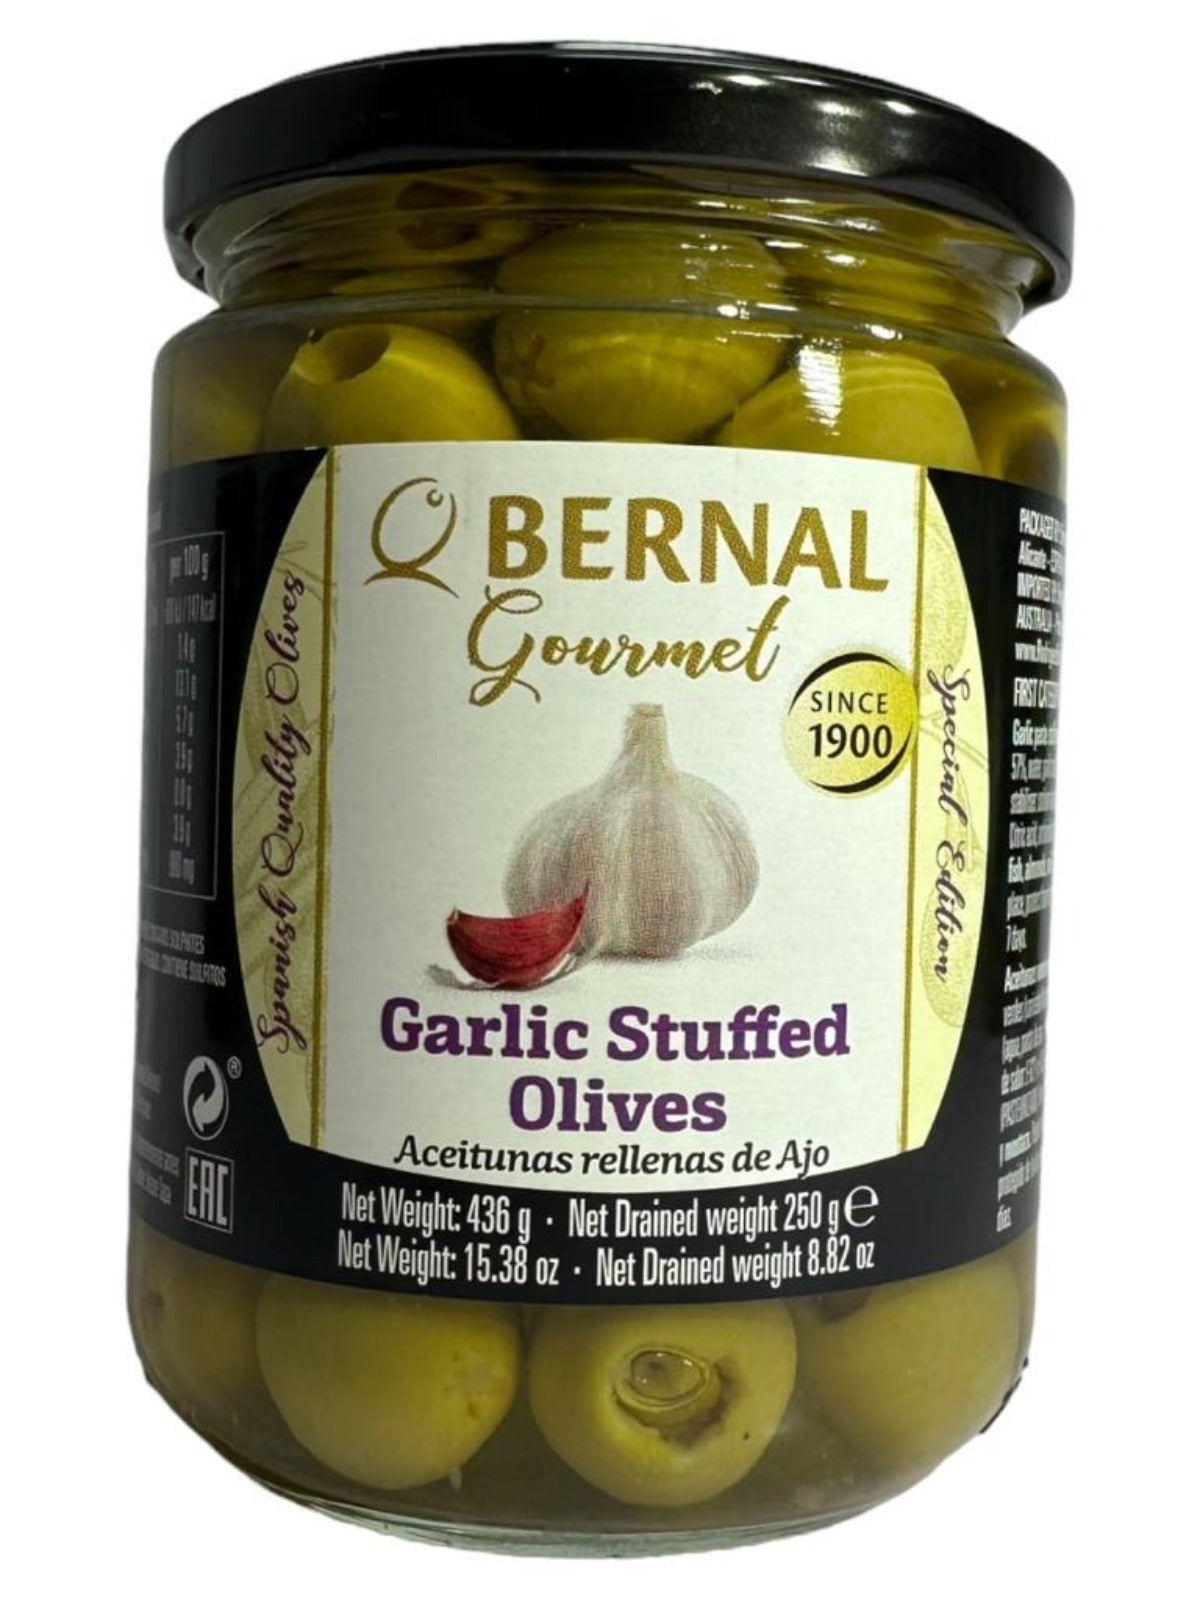 Bernal Gourmet Garlic Stuffed Olives 436g Gross 225g Drained Best Before End of May 2027